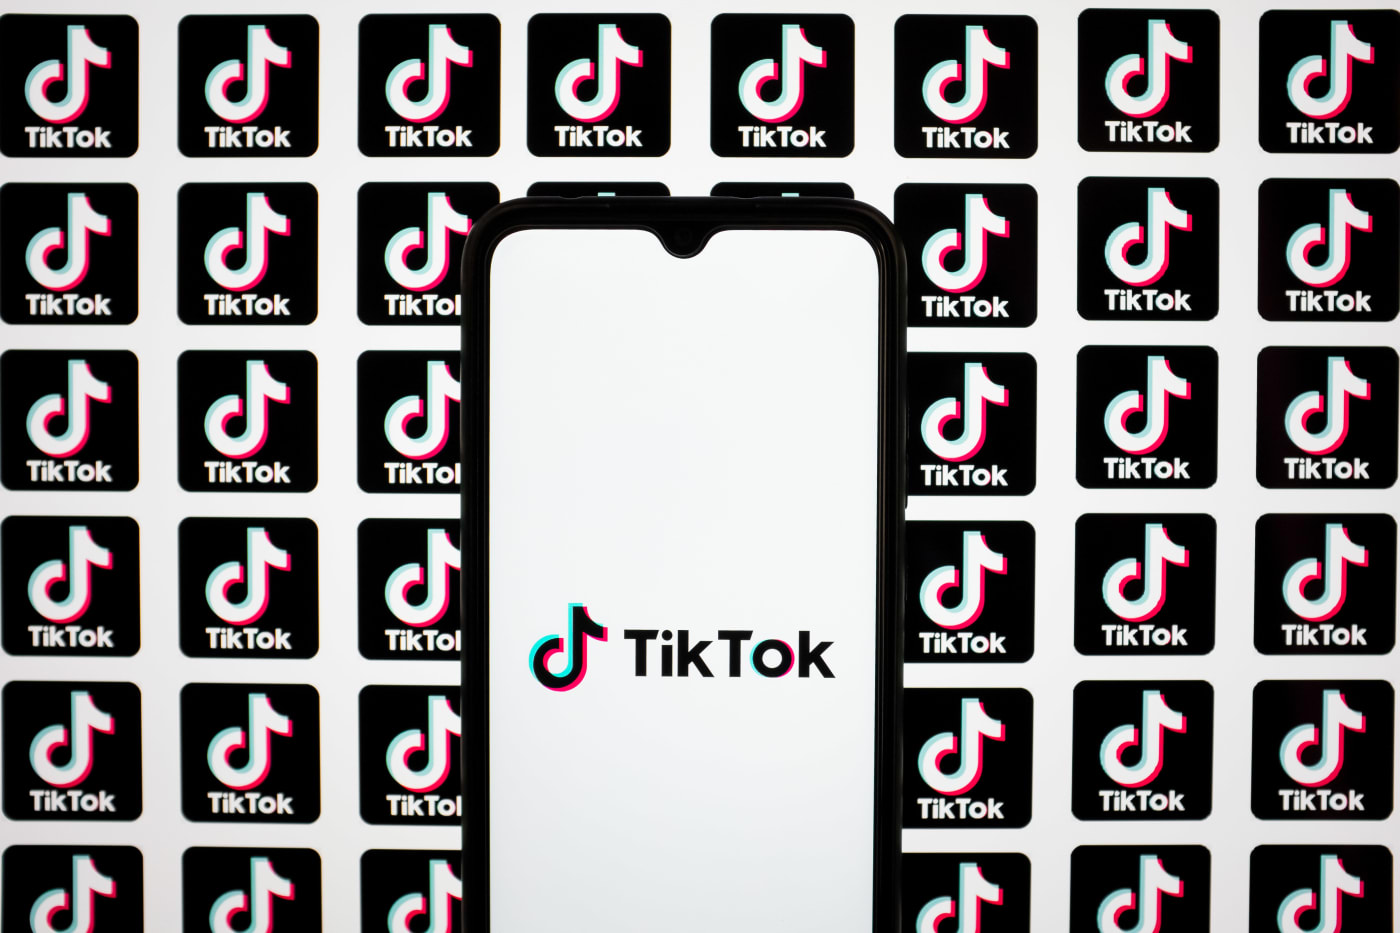 TikTok might be going around Apple's in-app purchase rules for its coins